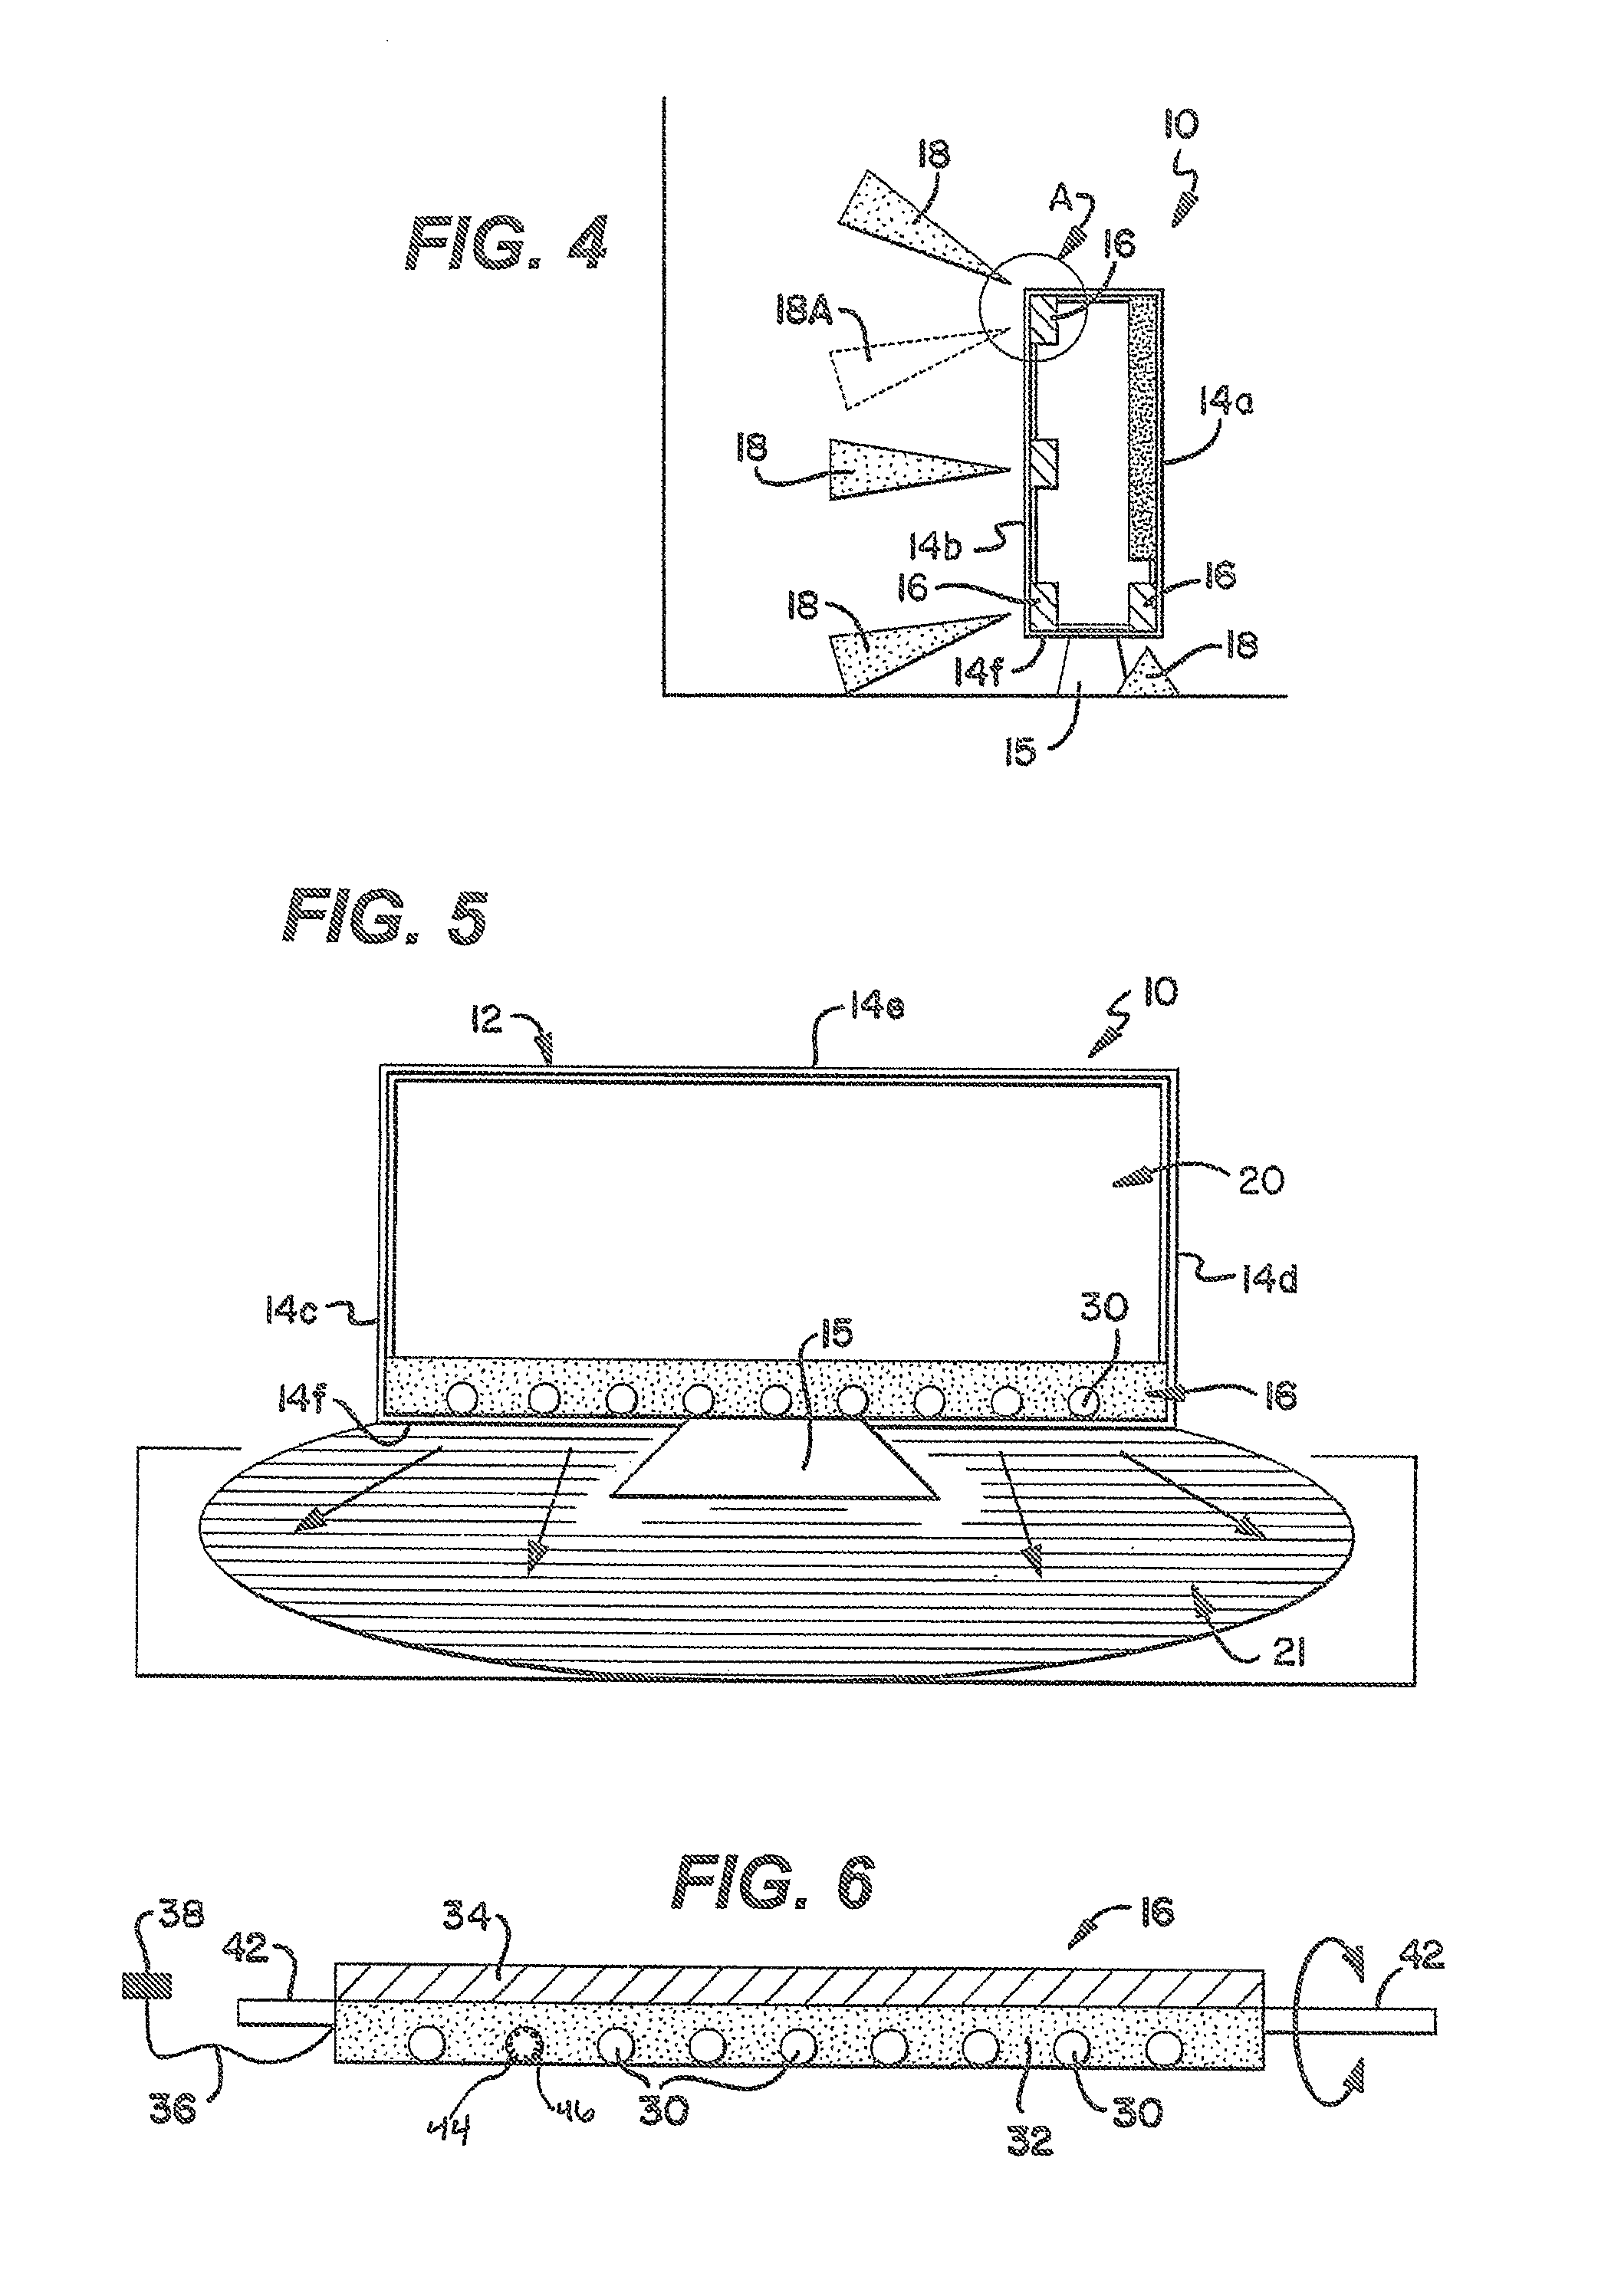 Electronic display device with integrated lighting system